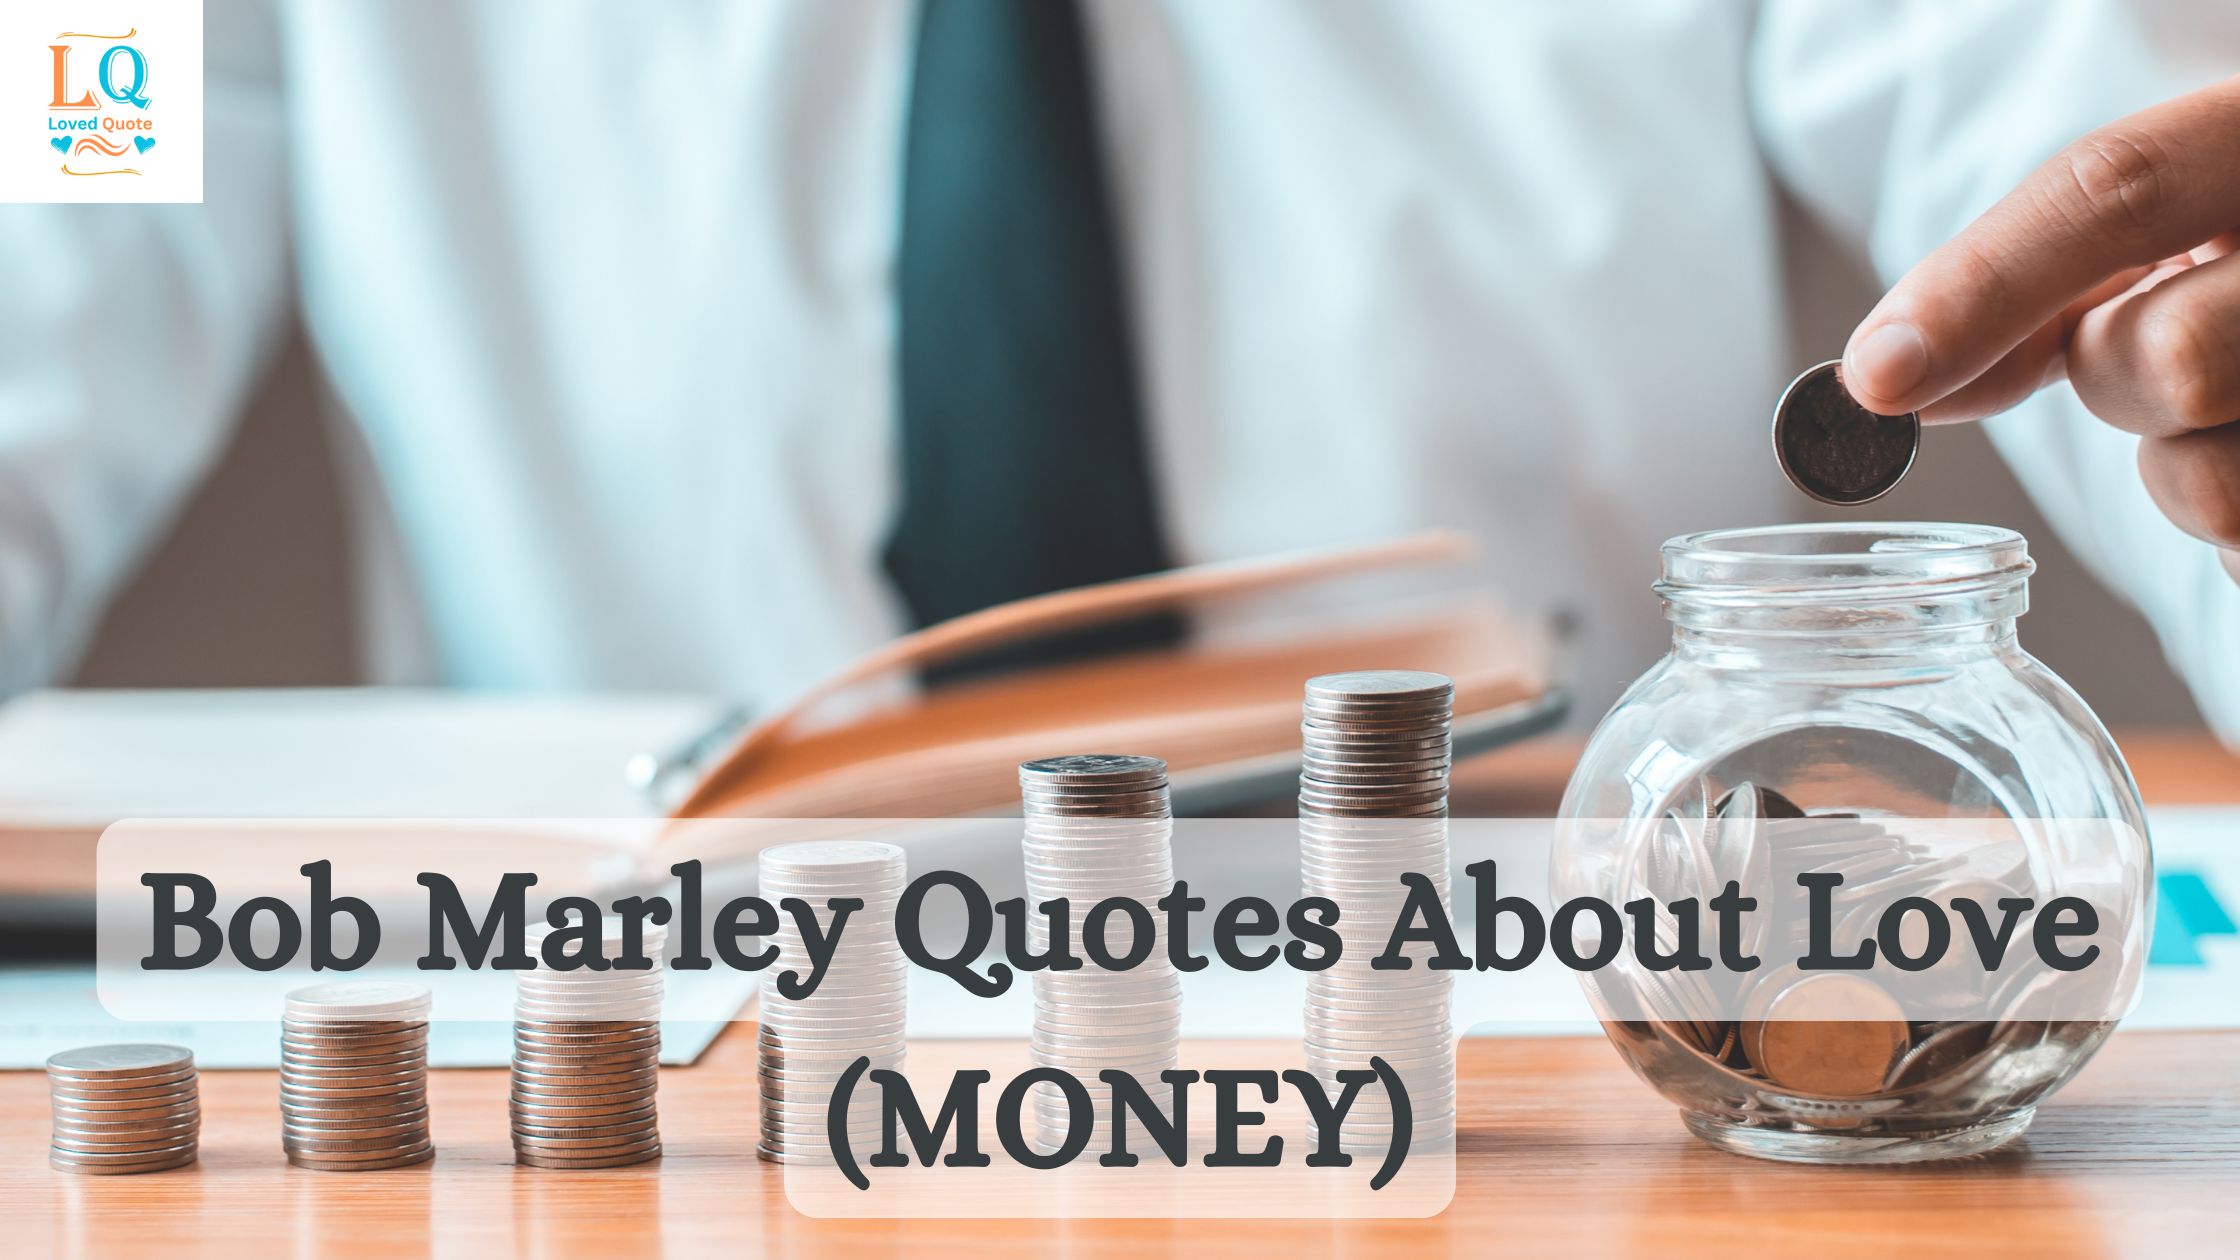 Bob Marley Quotes About Love (MONEY)